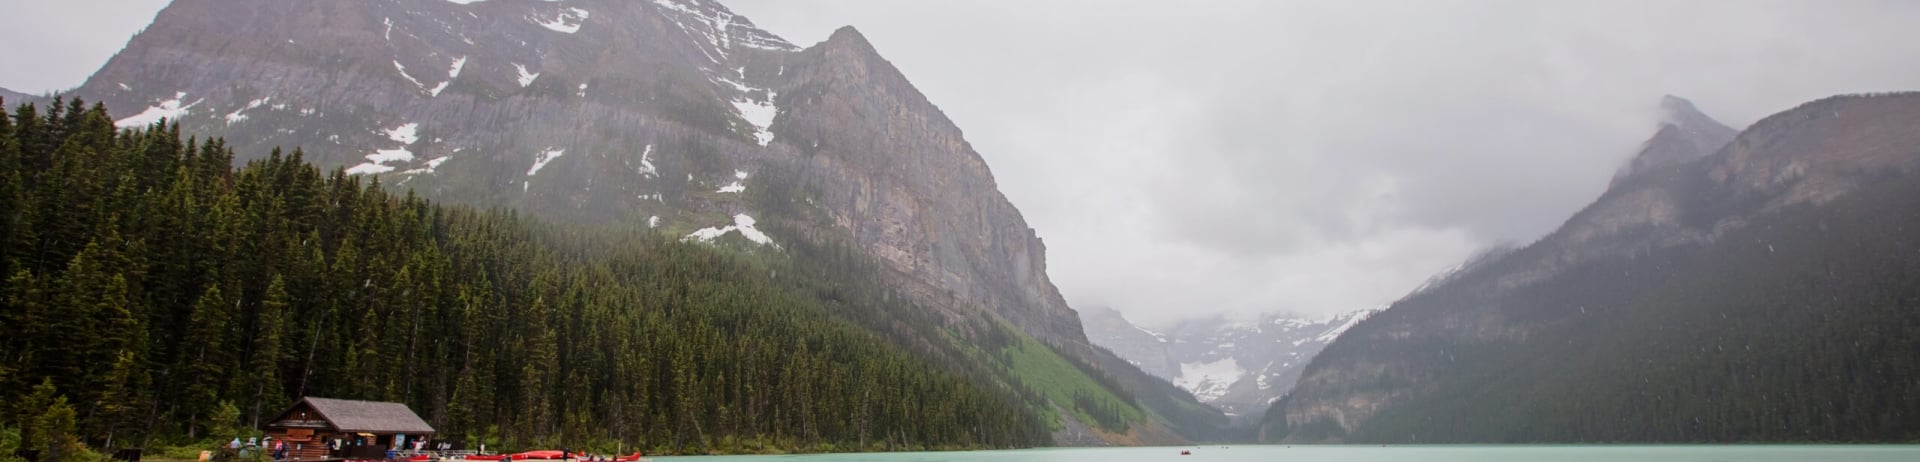 Top 5 Rainy Day Activities in Lake Louise 